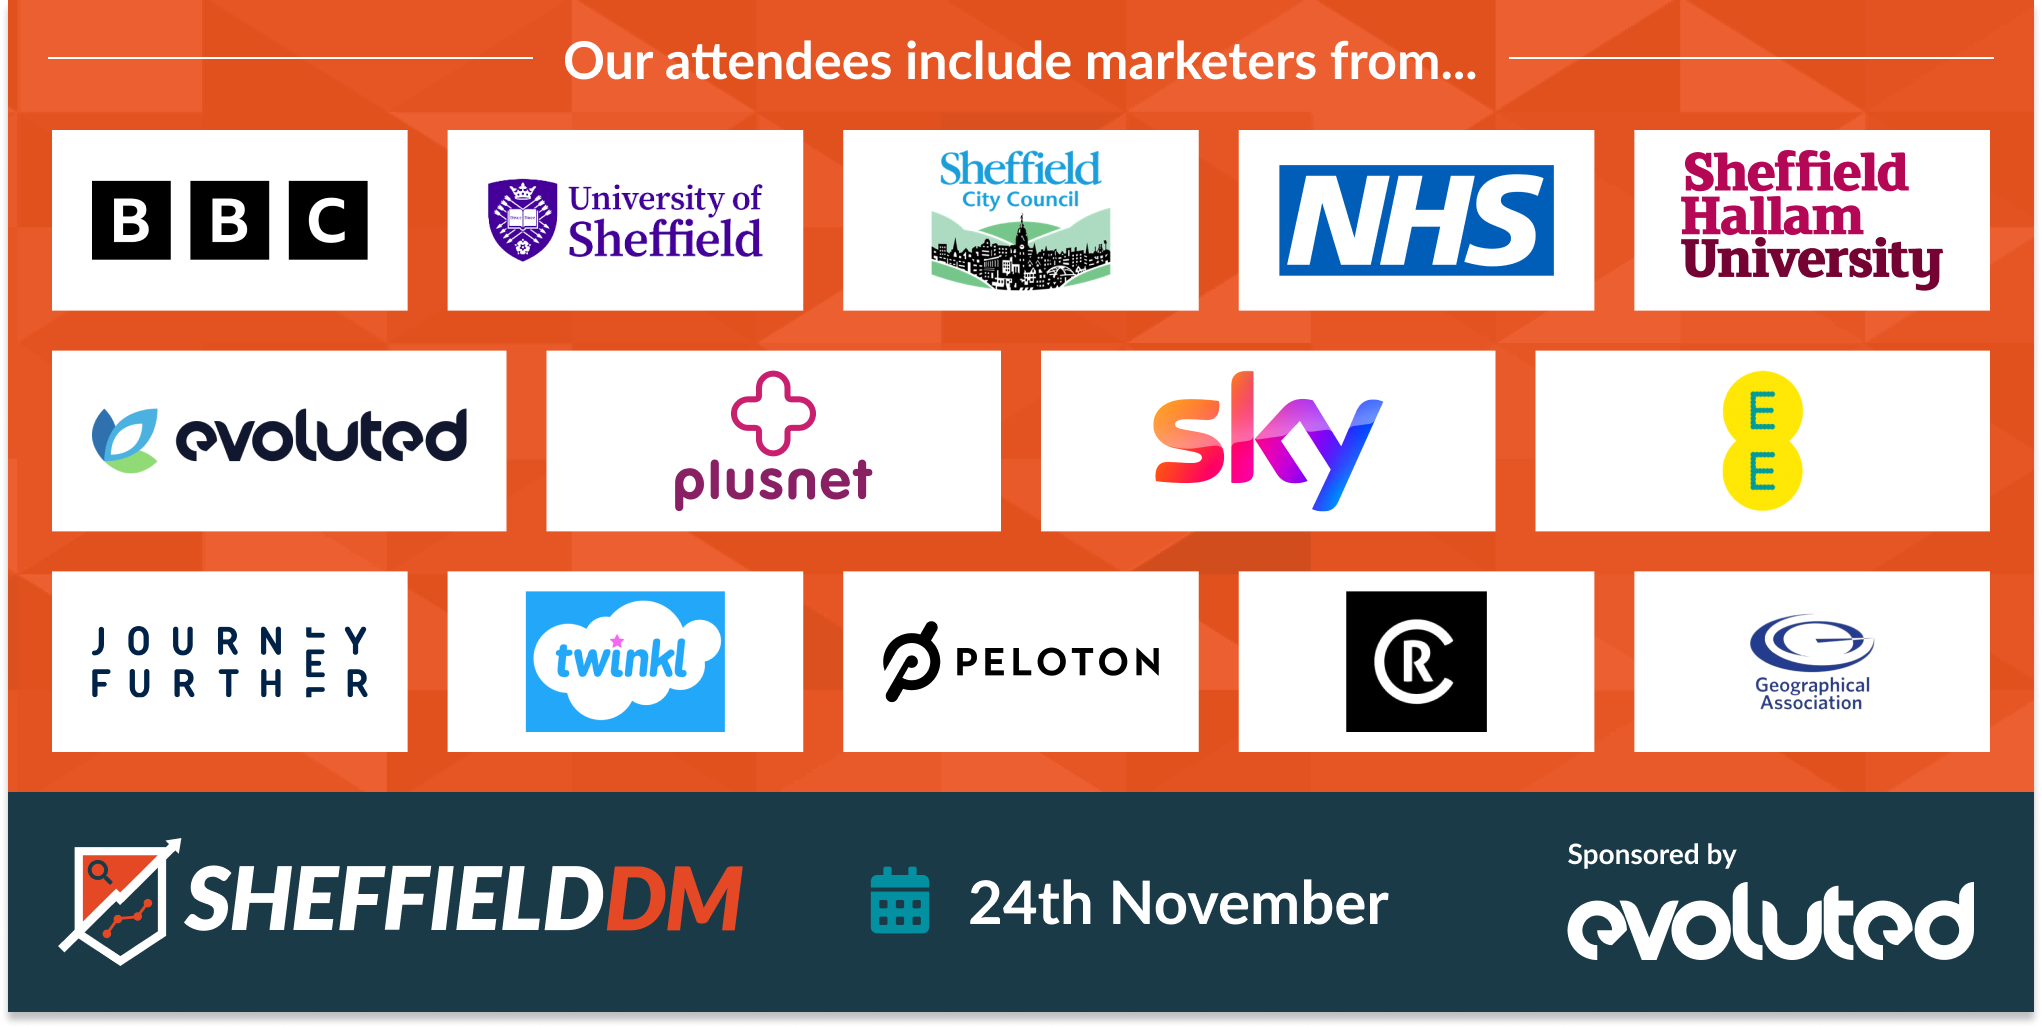 sheffield-dm-attendee-organisations-mixed.png